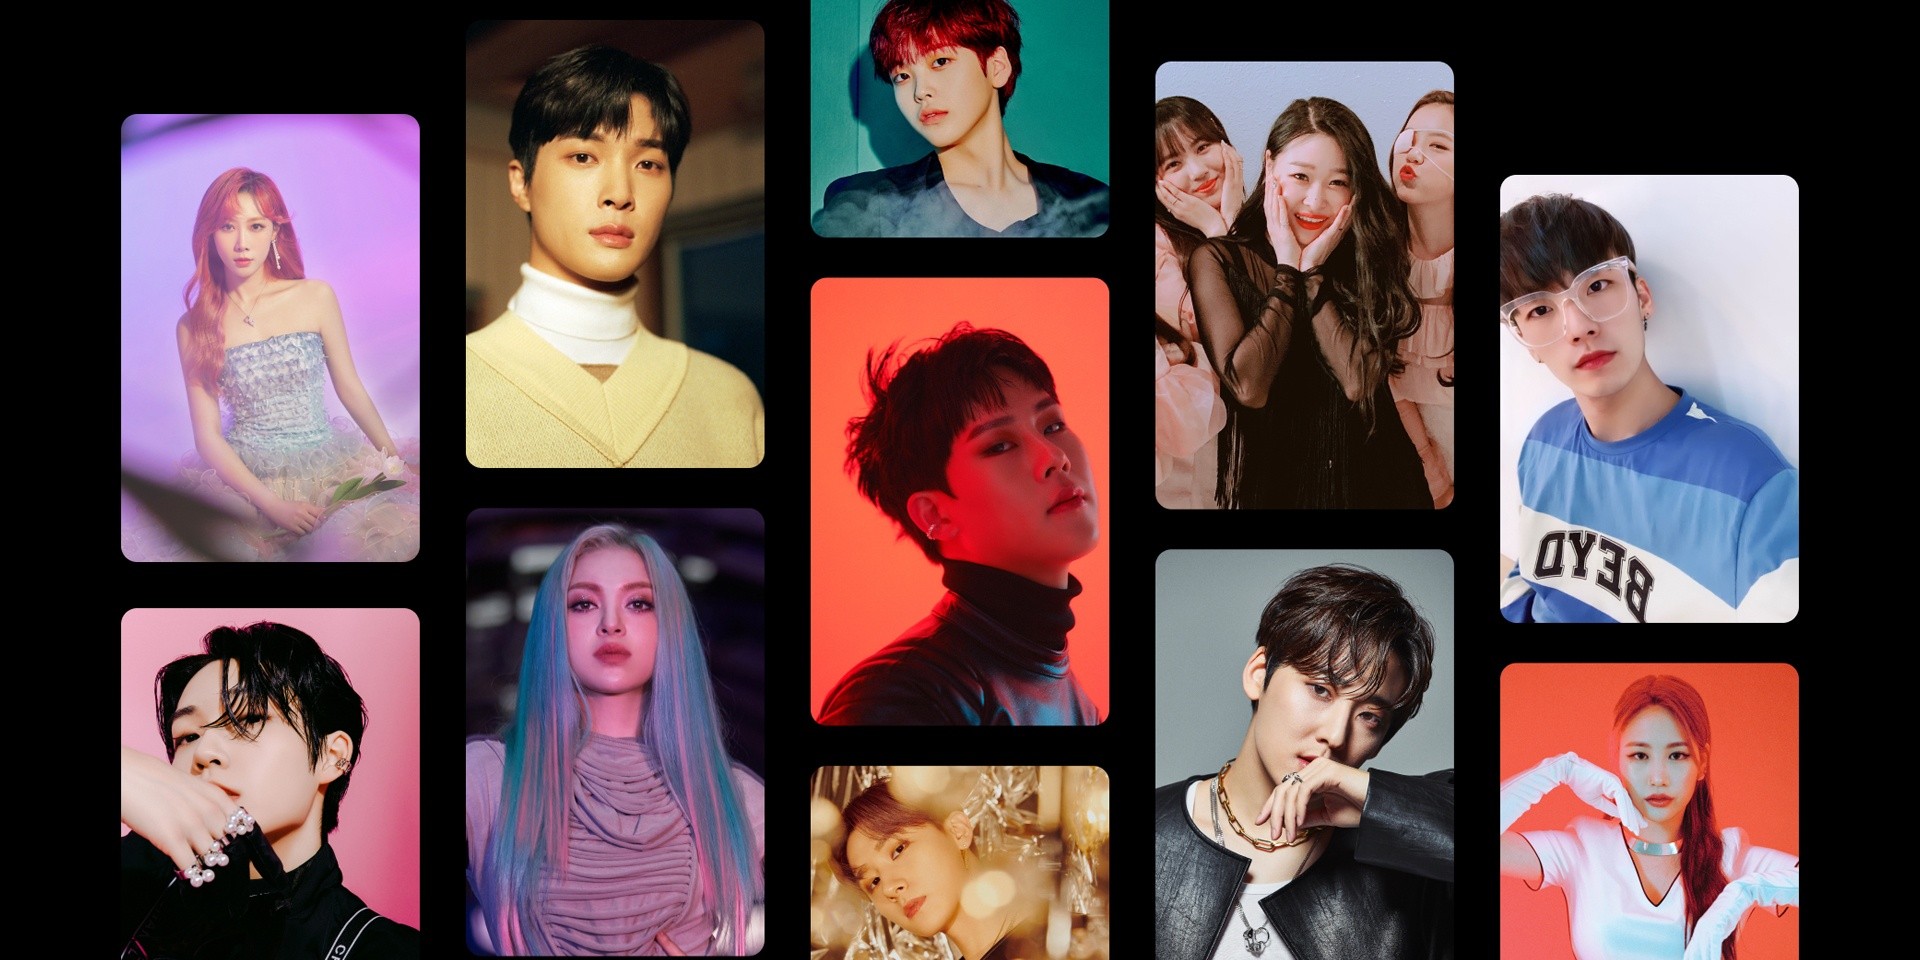 Step into the world of MONSTA X, NIve, Jamie, The Boyz, and many more with Airbnb's online festival Inside K-Pop